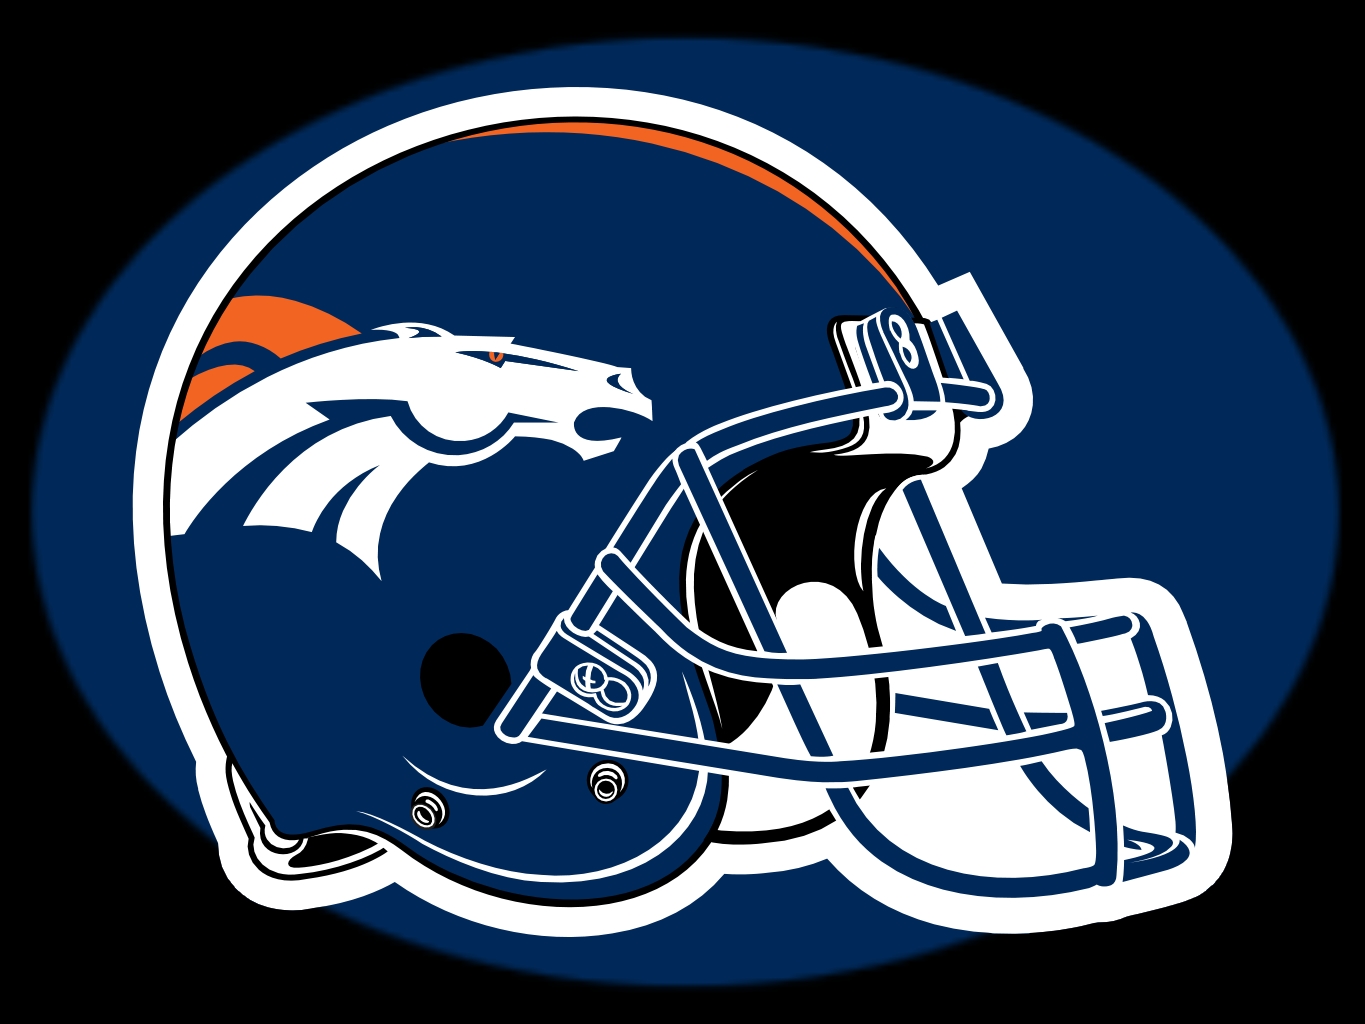  you like this Denver Broncos wallpaper HD background as much as we do